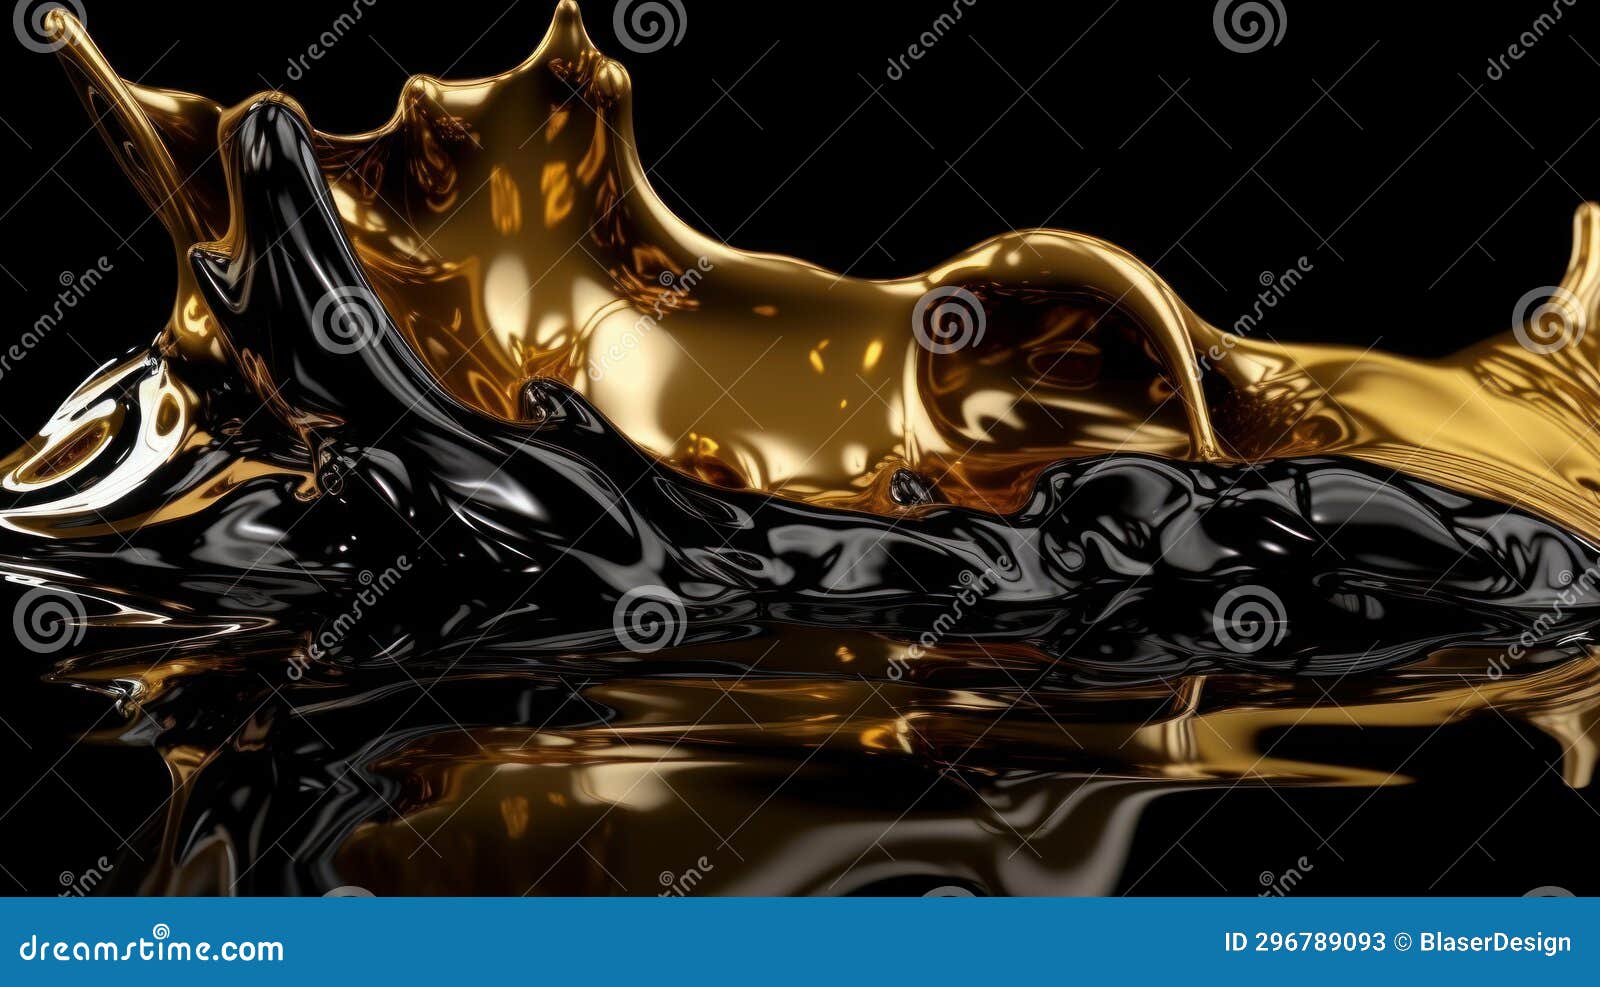 abstract elegance: stunning liquid gold sways obscured by shadows on a black background